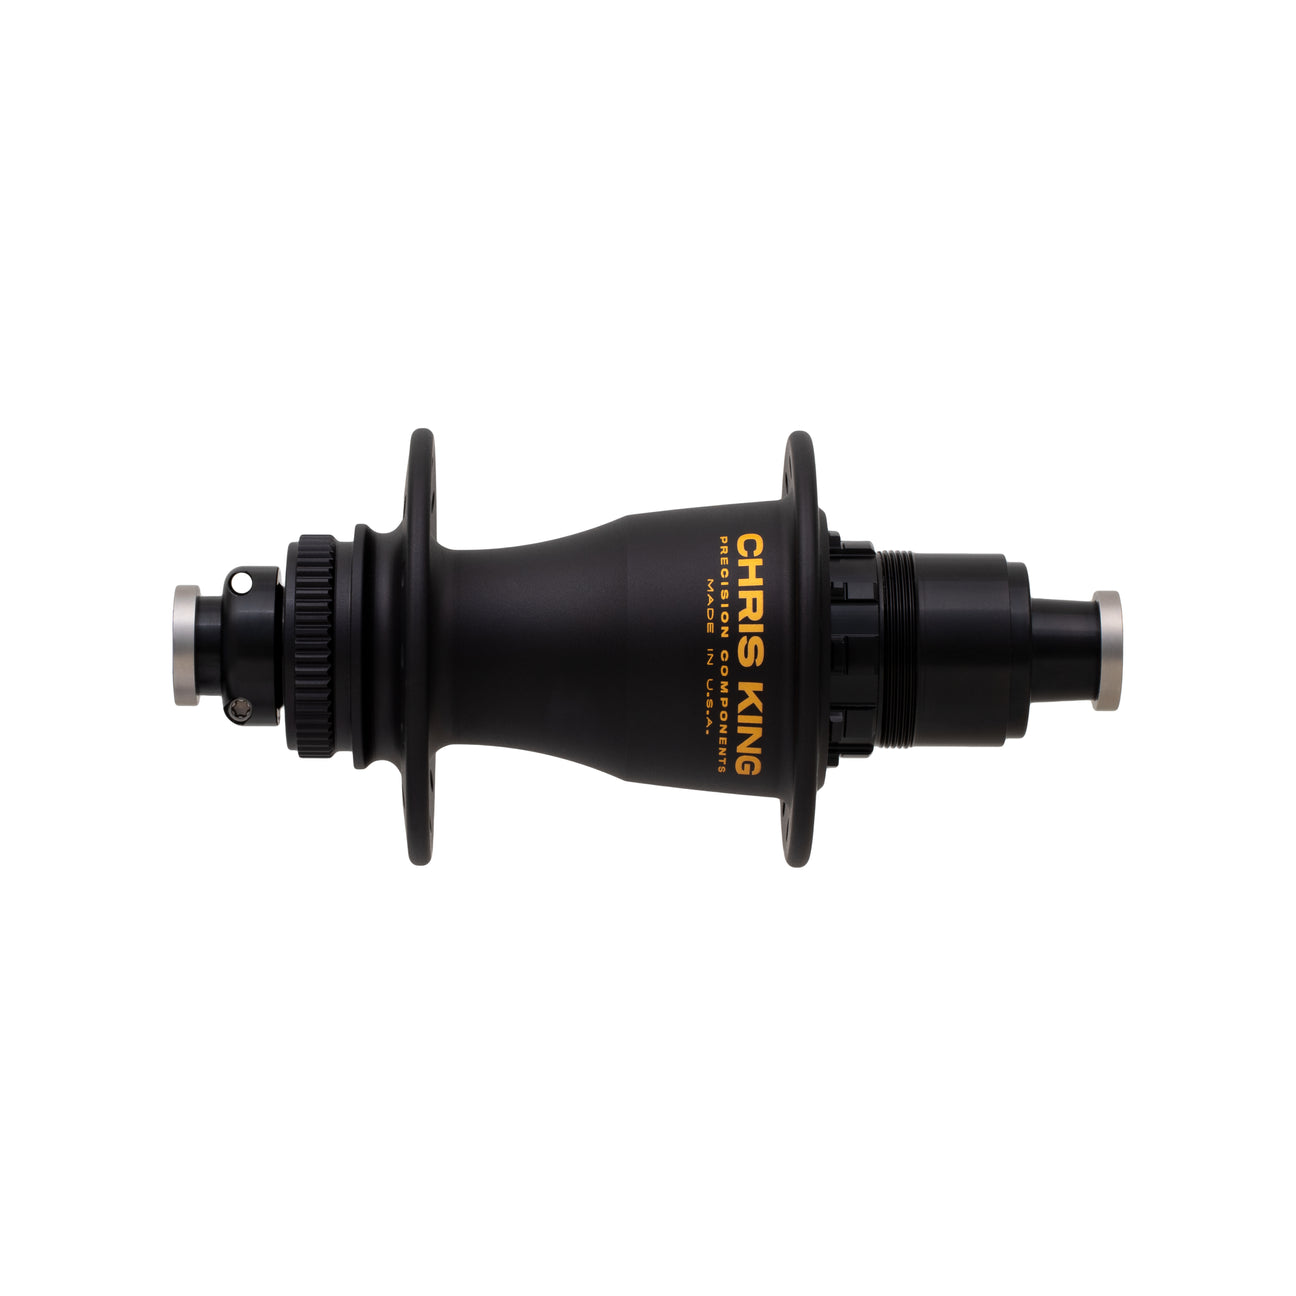 Chris king boost CL rear hub in two tone black/gold